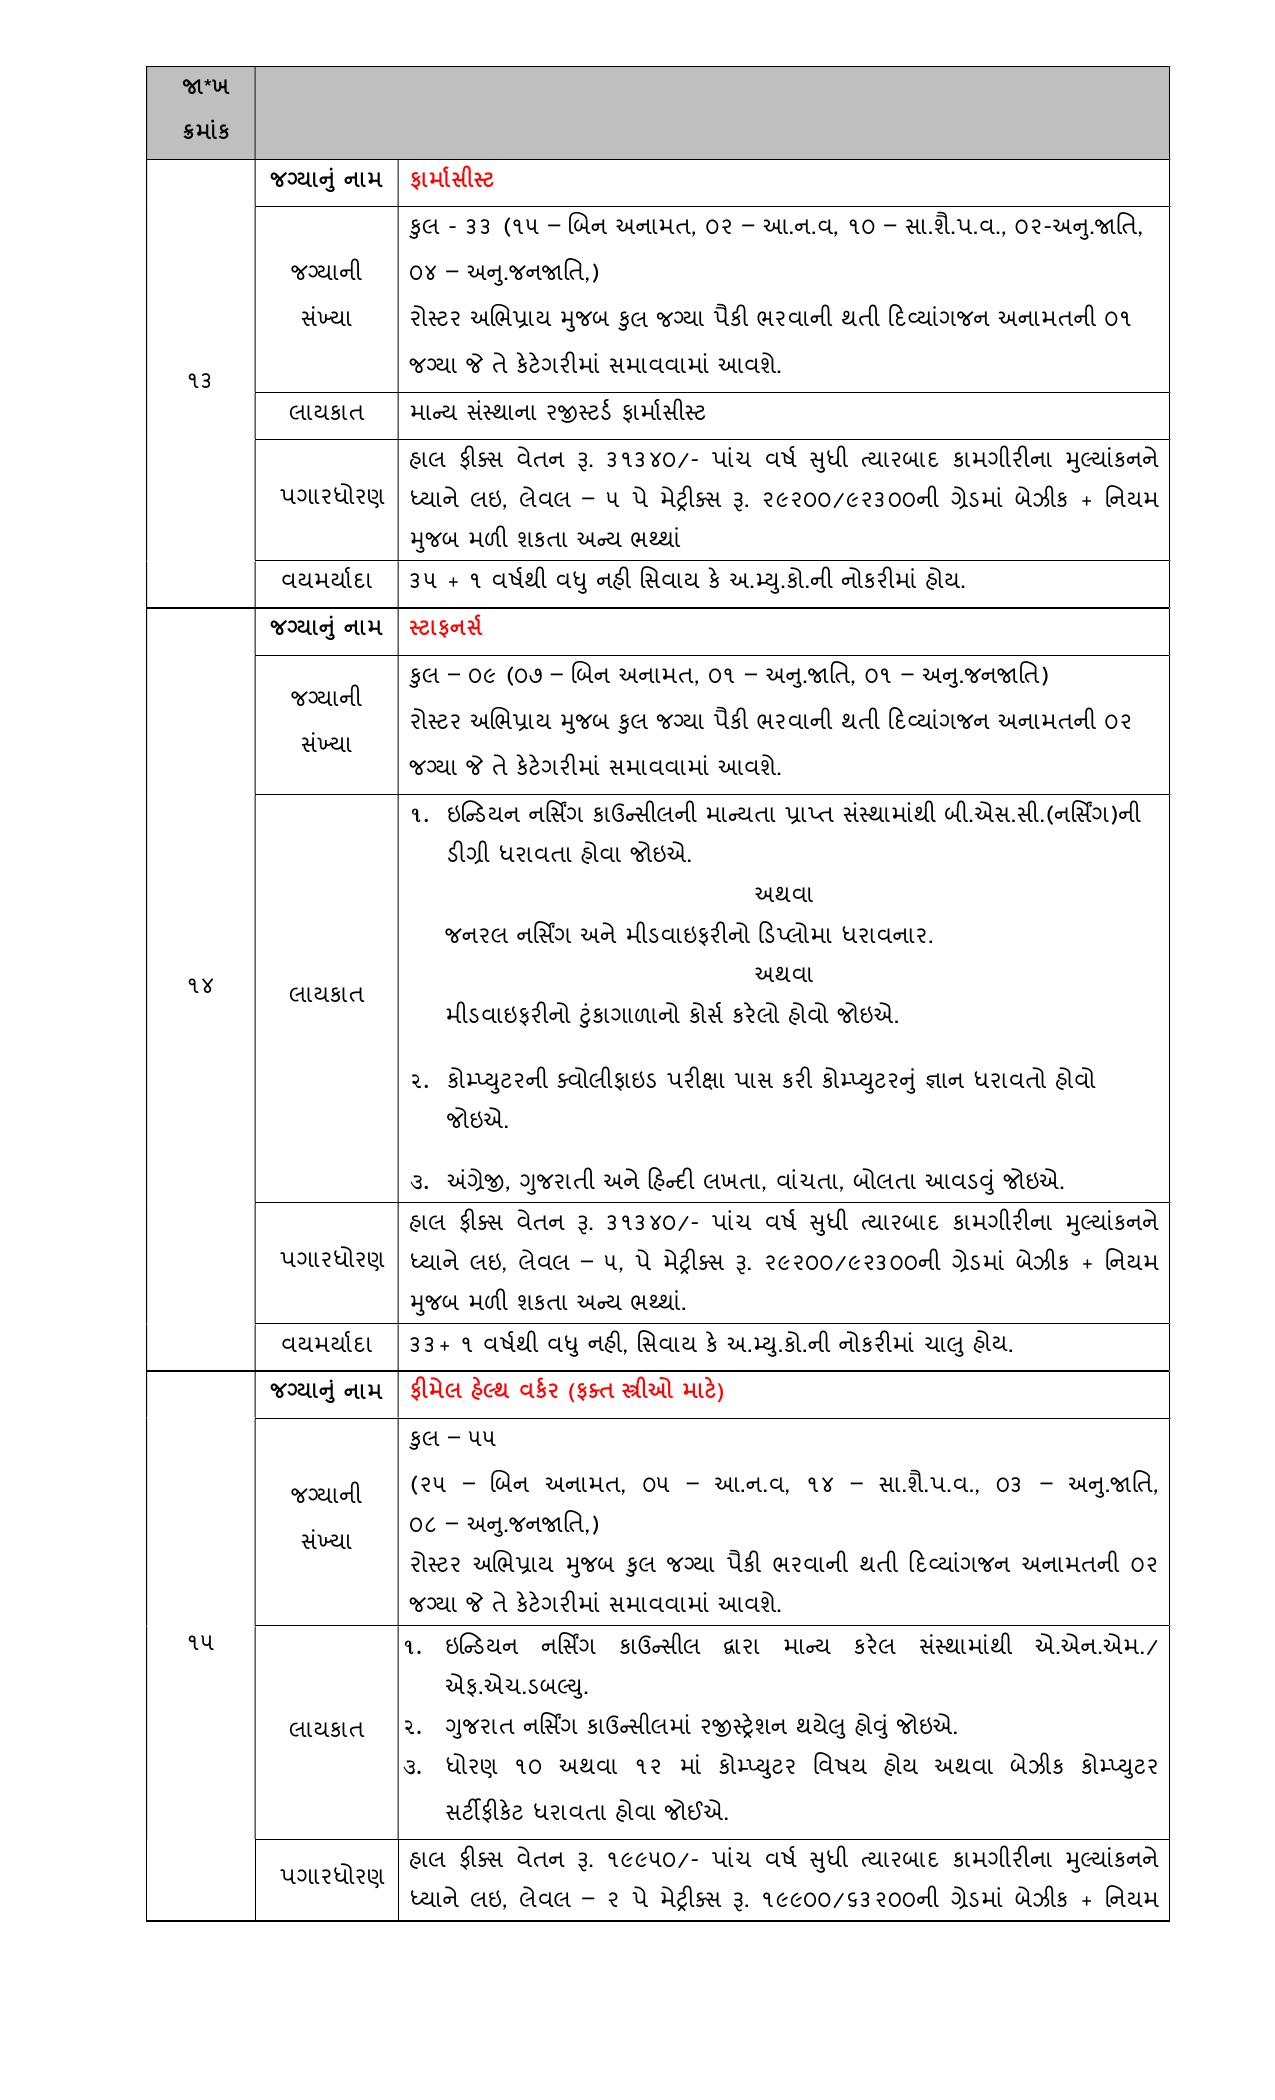 Ahmedabad Municipal Corporation (AMC) MPHW, Lab Technician and Various Posts Recruitment 2023 - Page 5